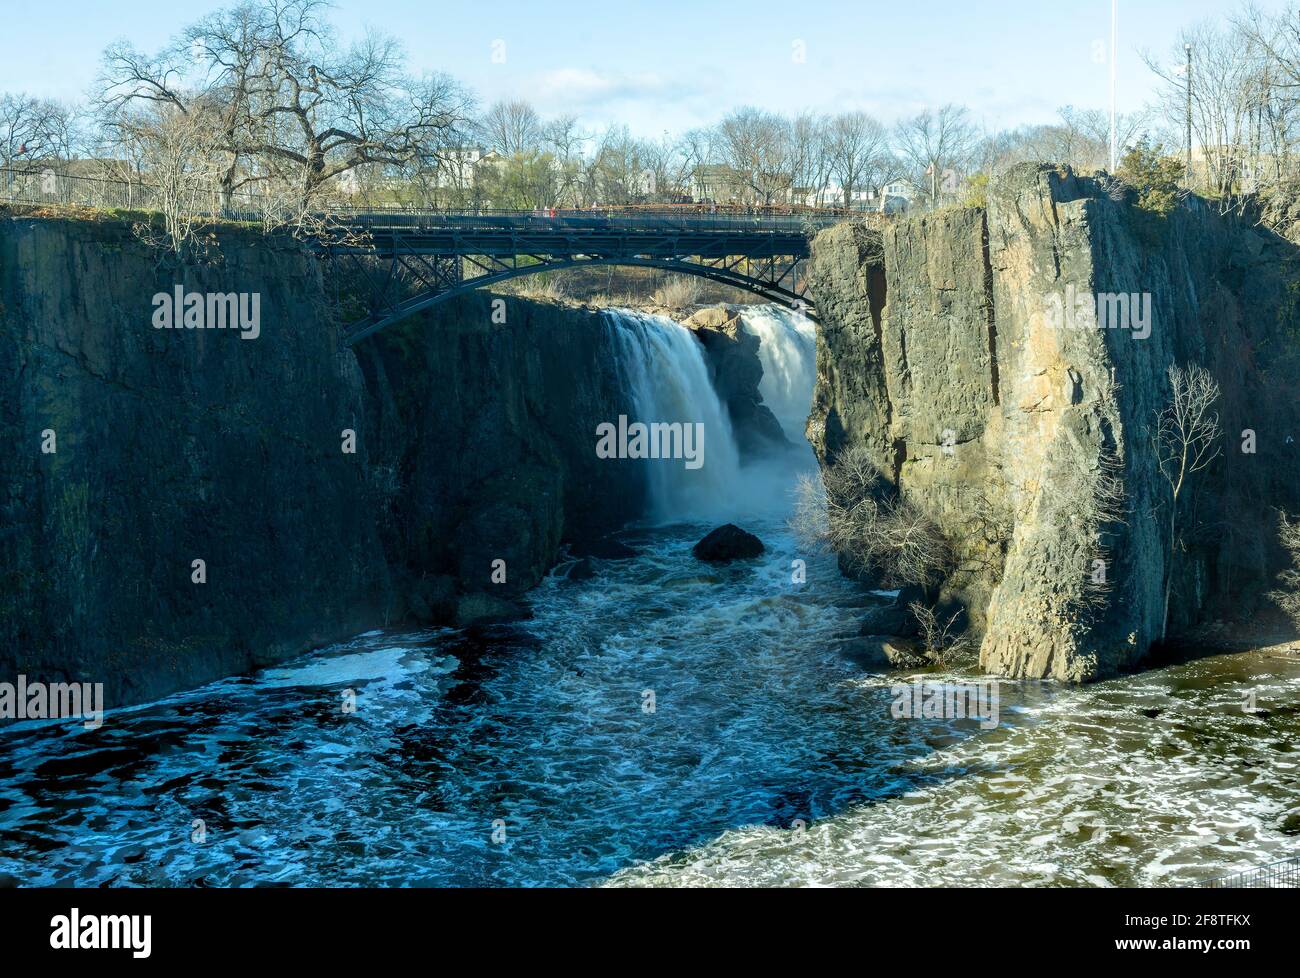 Paterson, NJ - USA - Dec. 6, 2020: Landscape view of the Great Falls of the Passaic River. A prominent waterfall, 77 feet high, on the Passaic River i Stock Photo